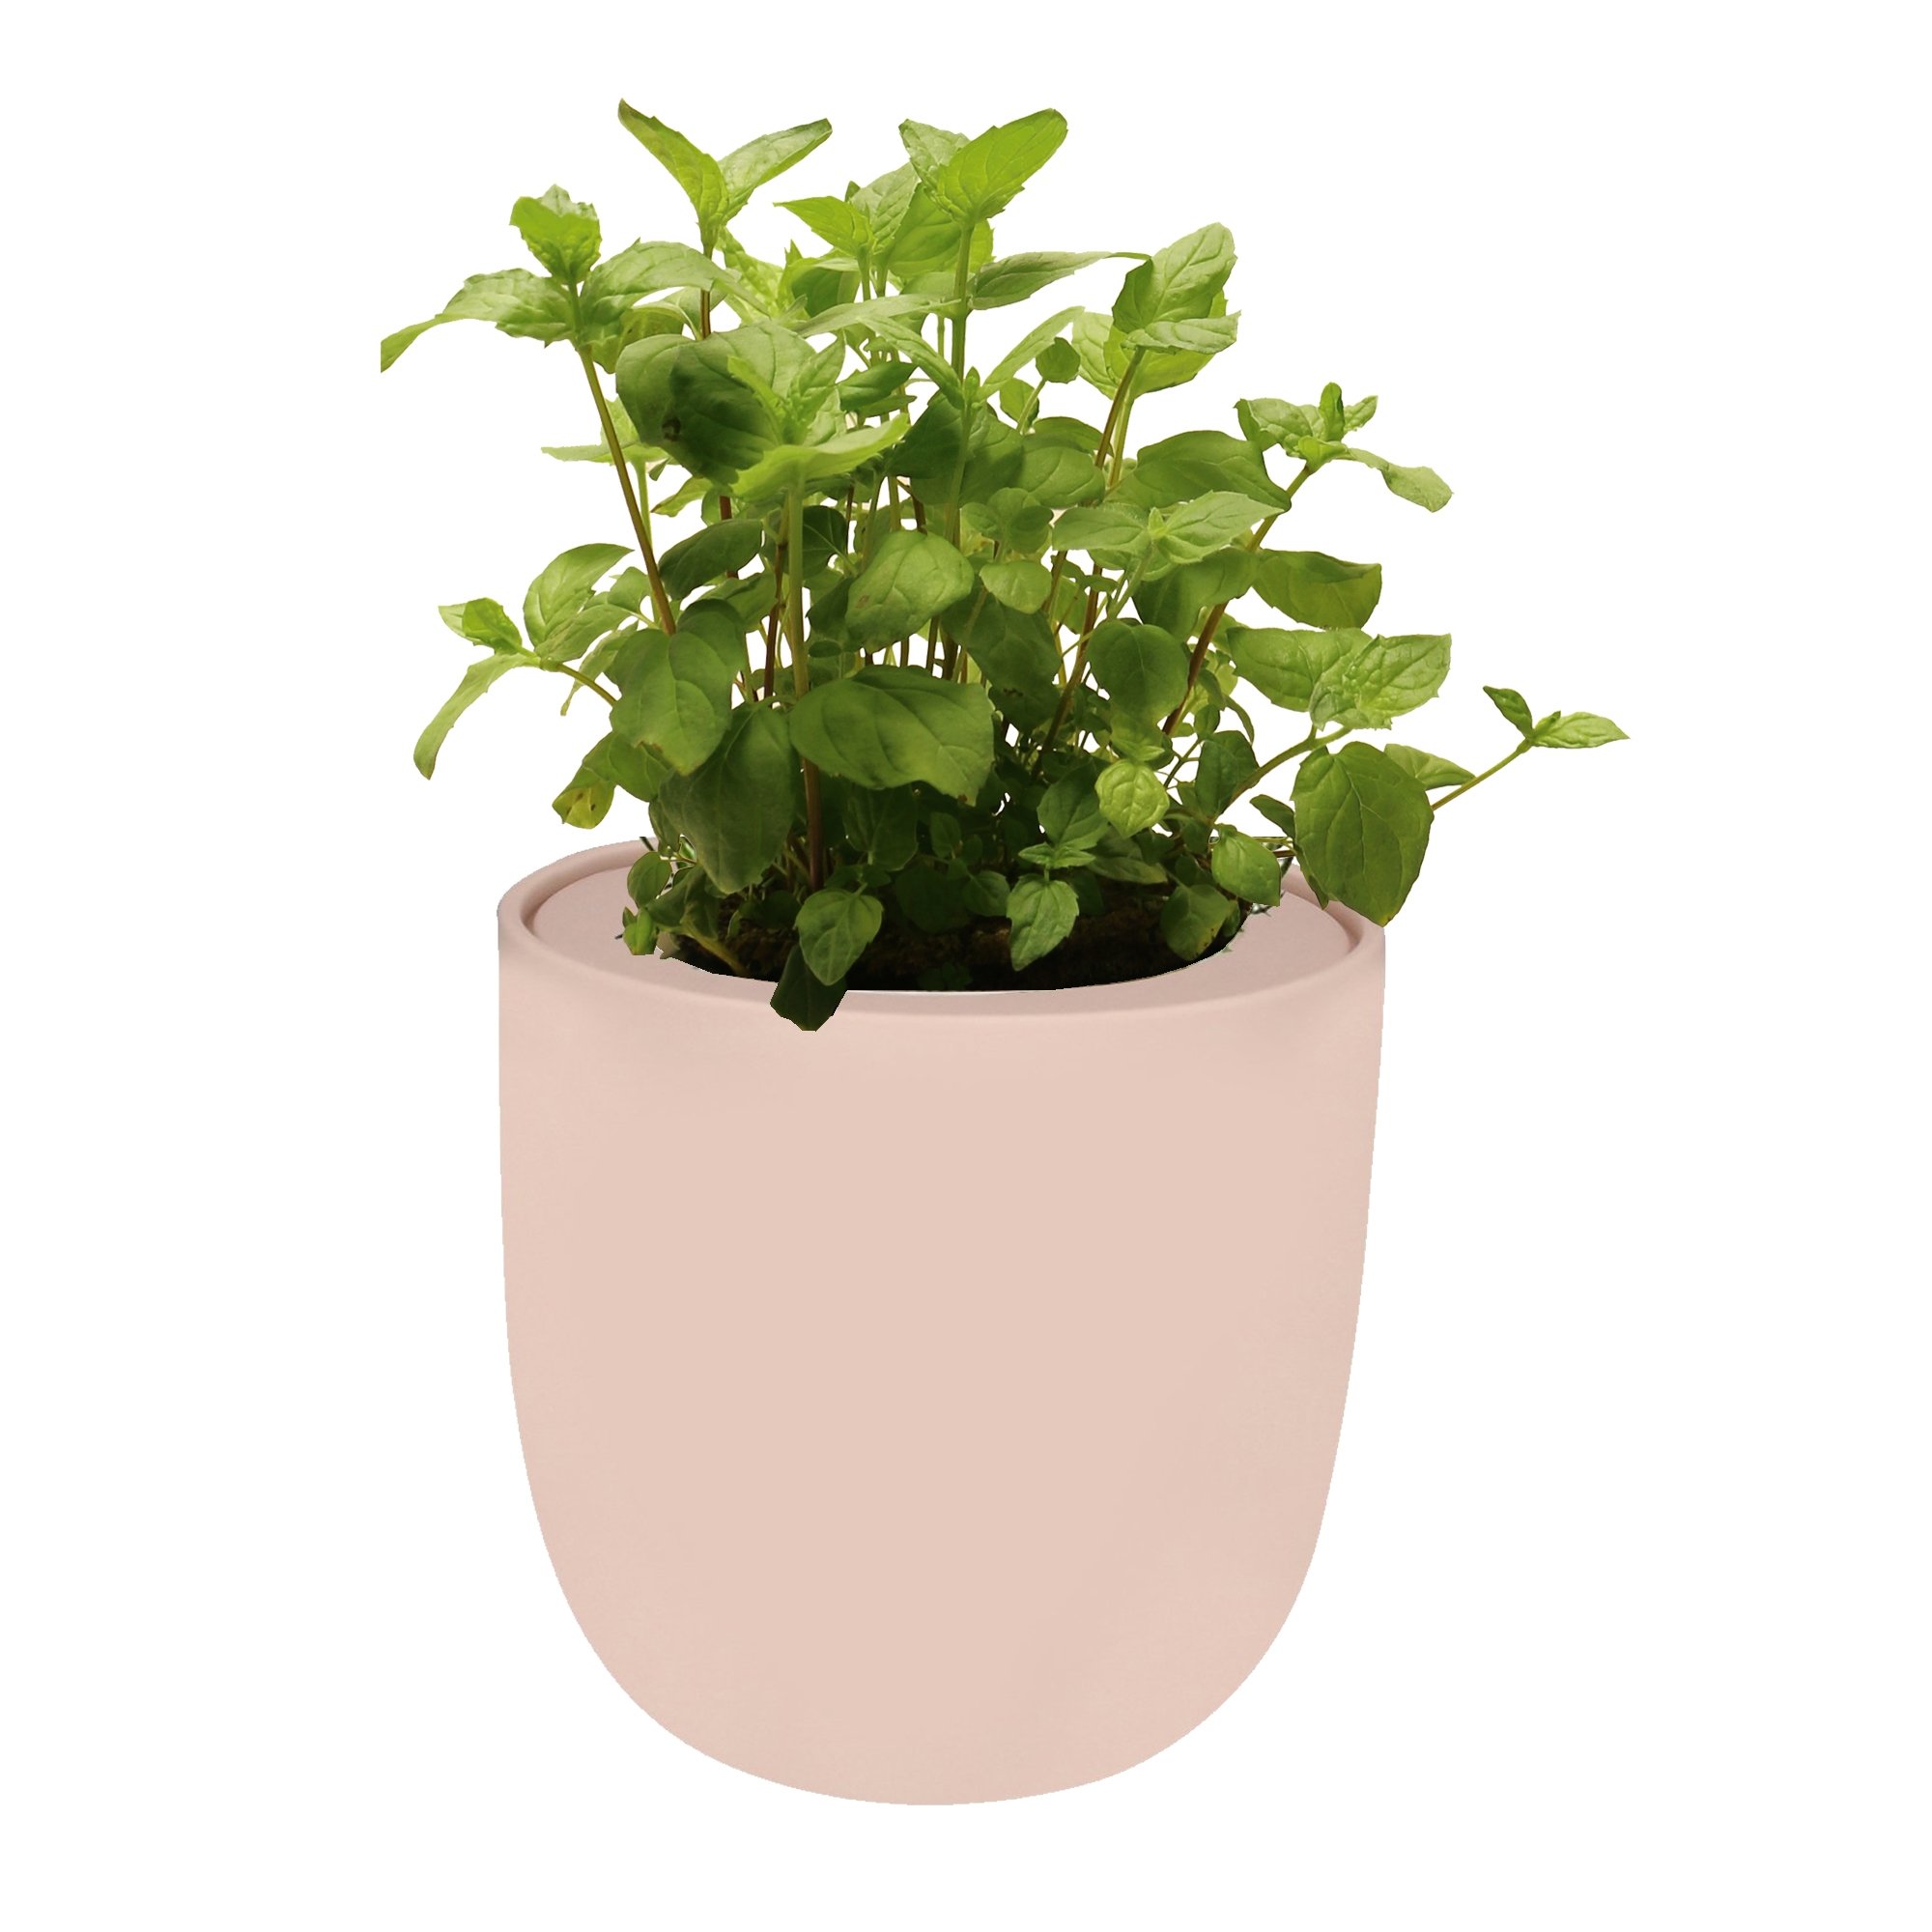 Peppermint Pink Ceramic Pot Hydroponic Growing Kit with Organic Seeds